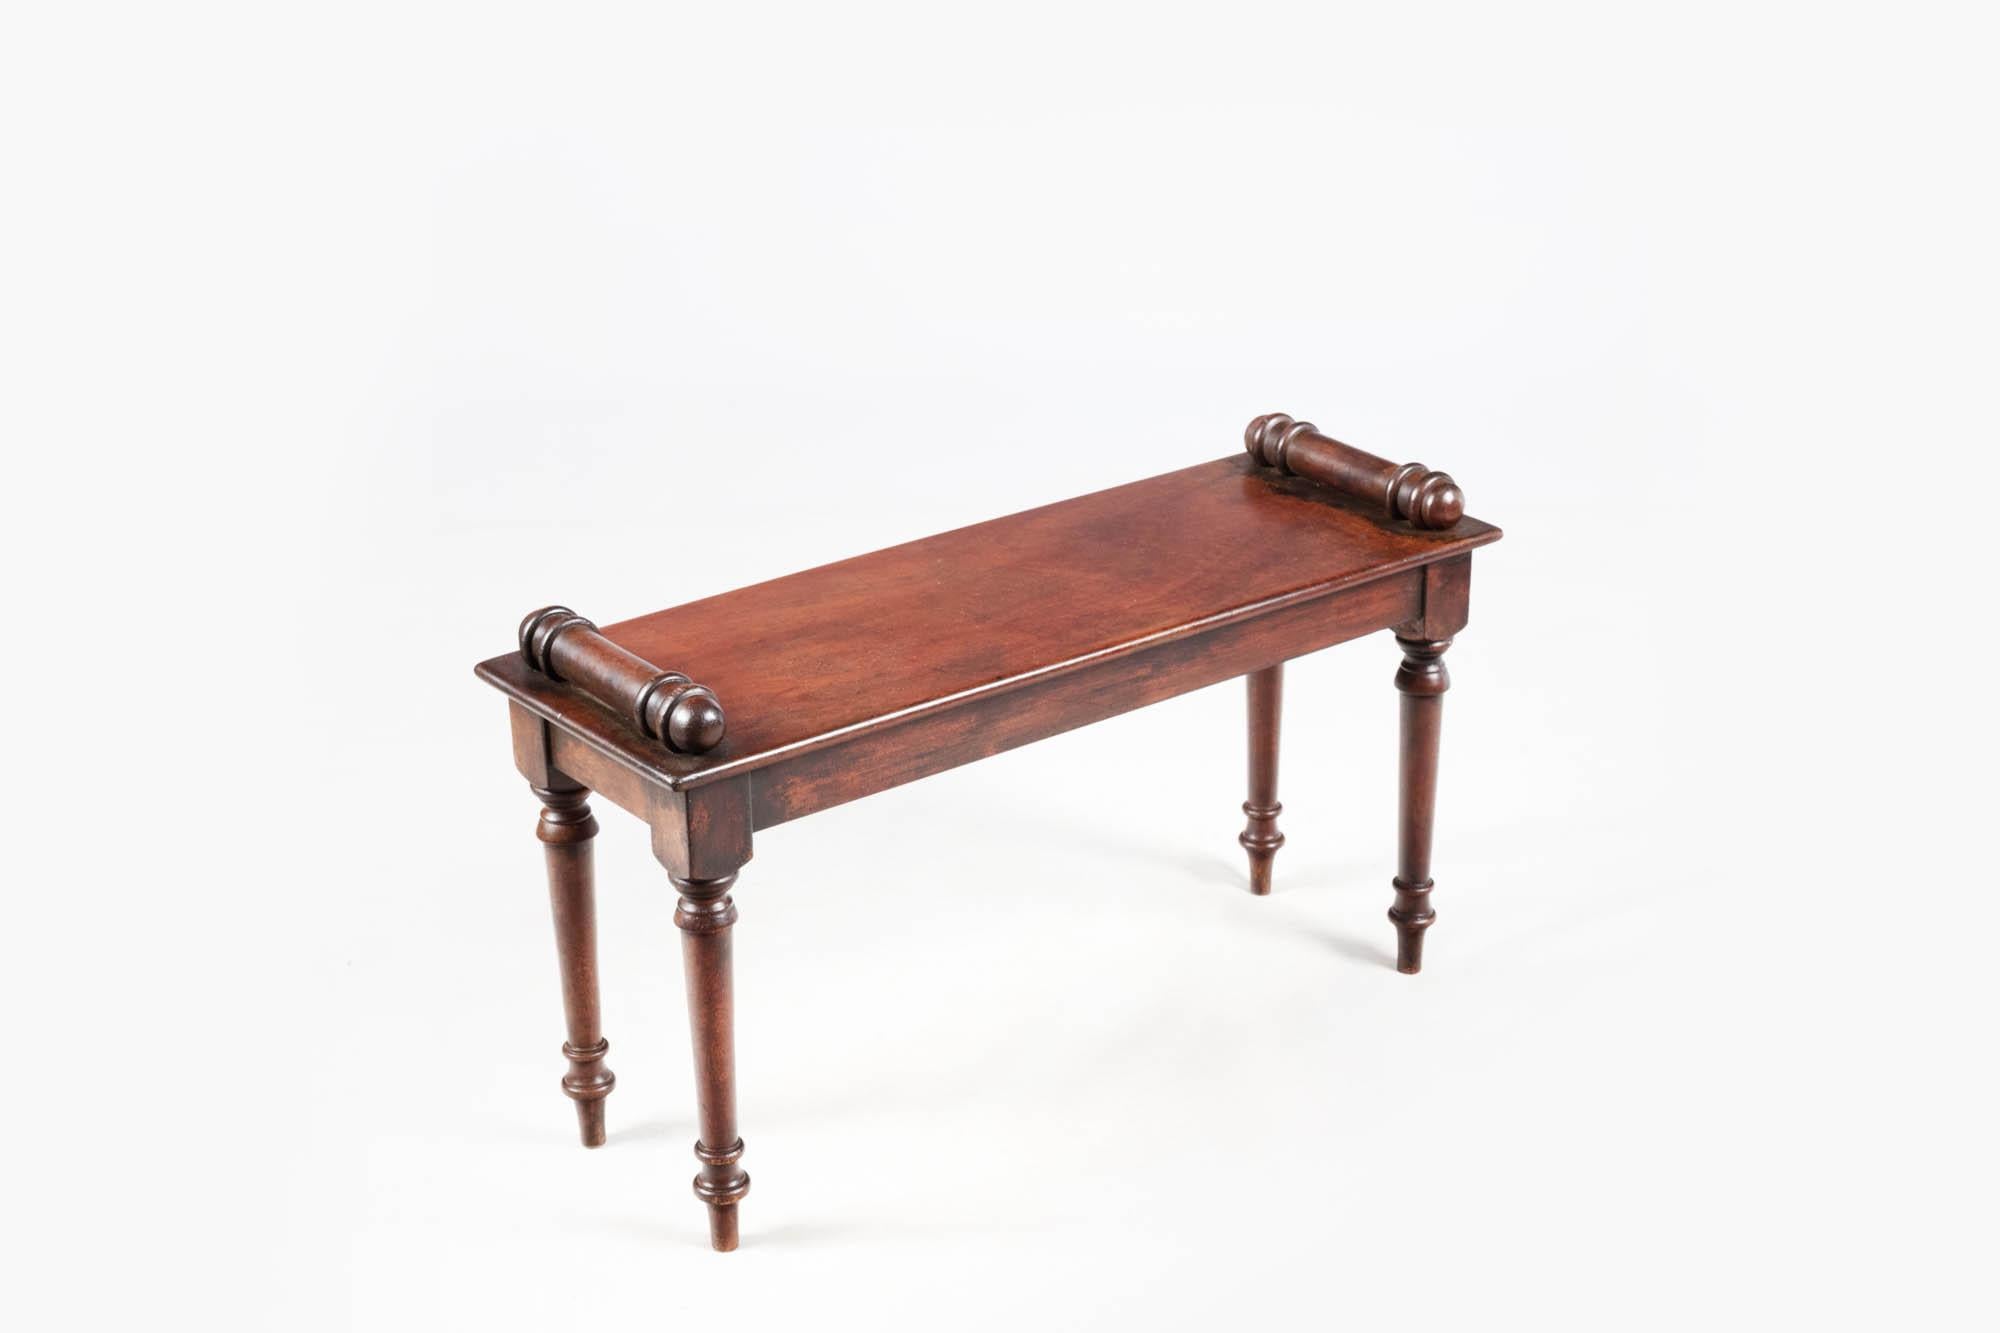 Pair 19th Century George IV Tatham Hall benches with simple planked seats, turned baluster ends, and sitting on turned tapering legs. Circa 1830.

The style of these benches is derived from Charles Heathcote Tatham's influential publication Etchings